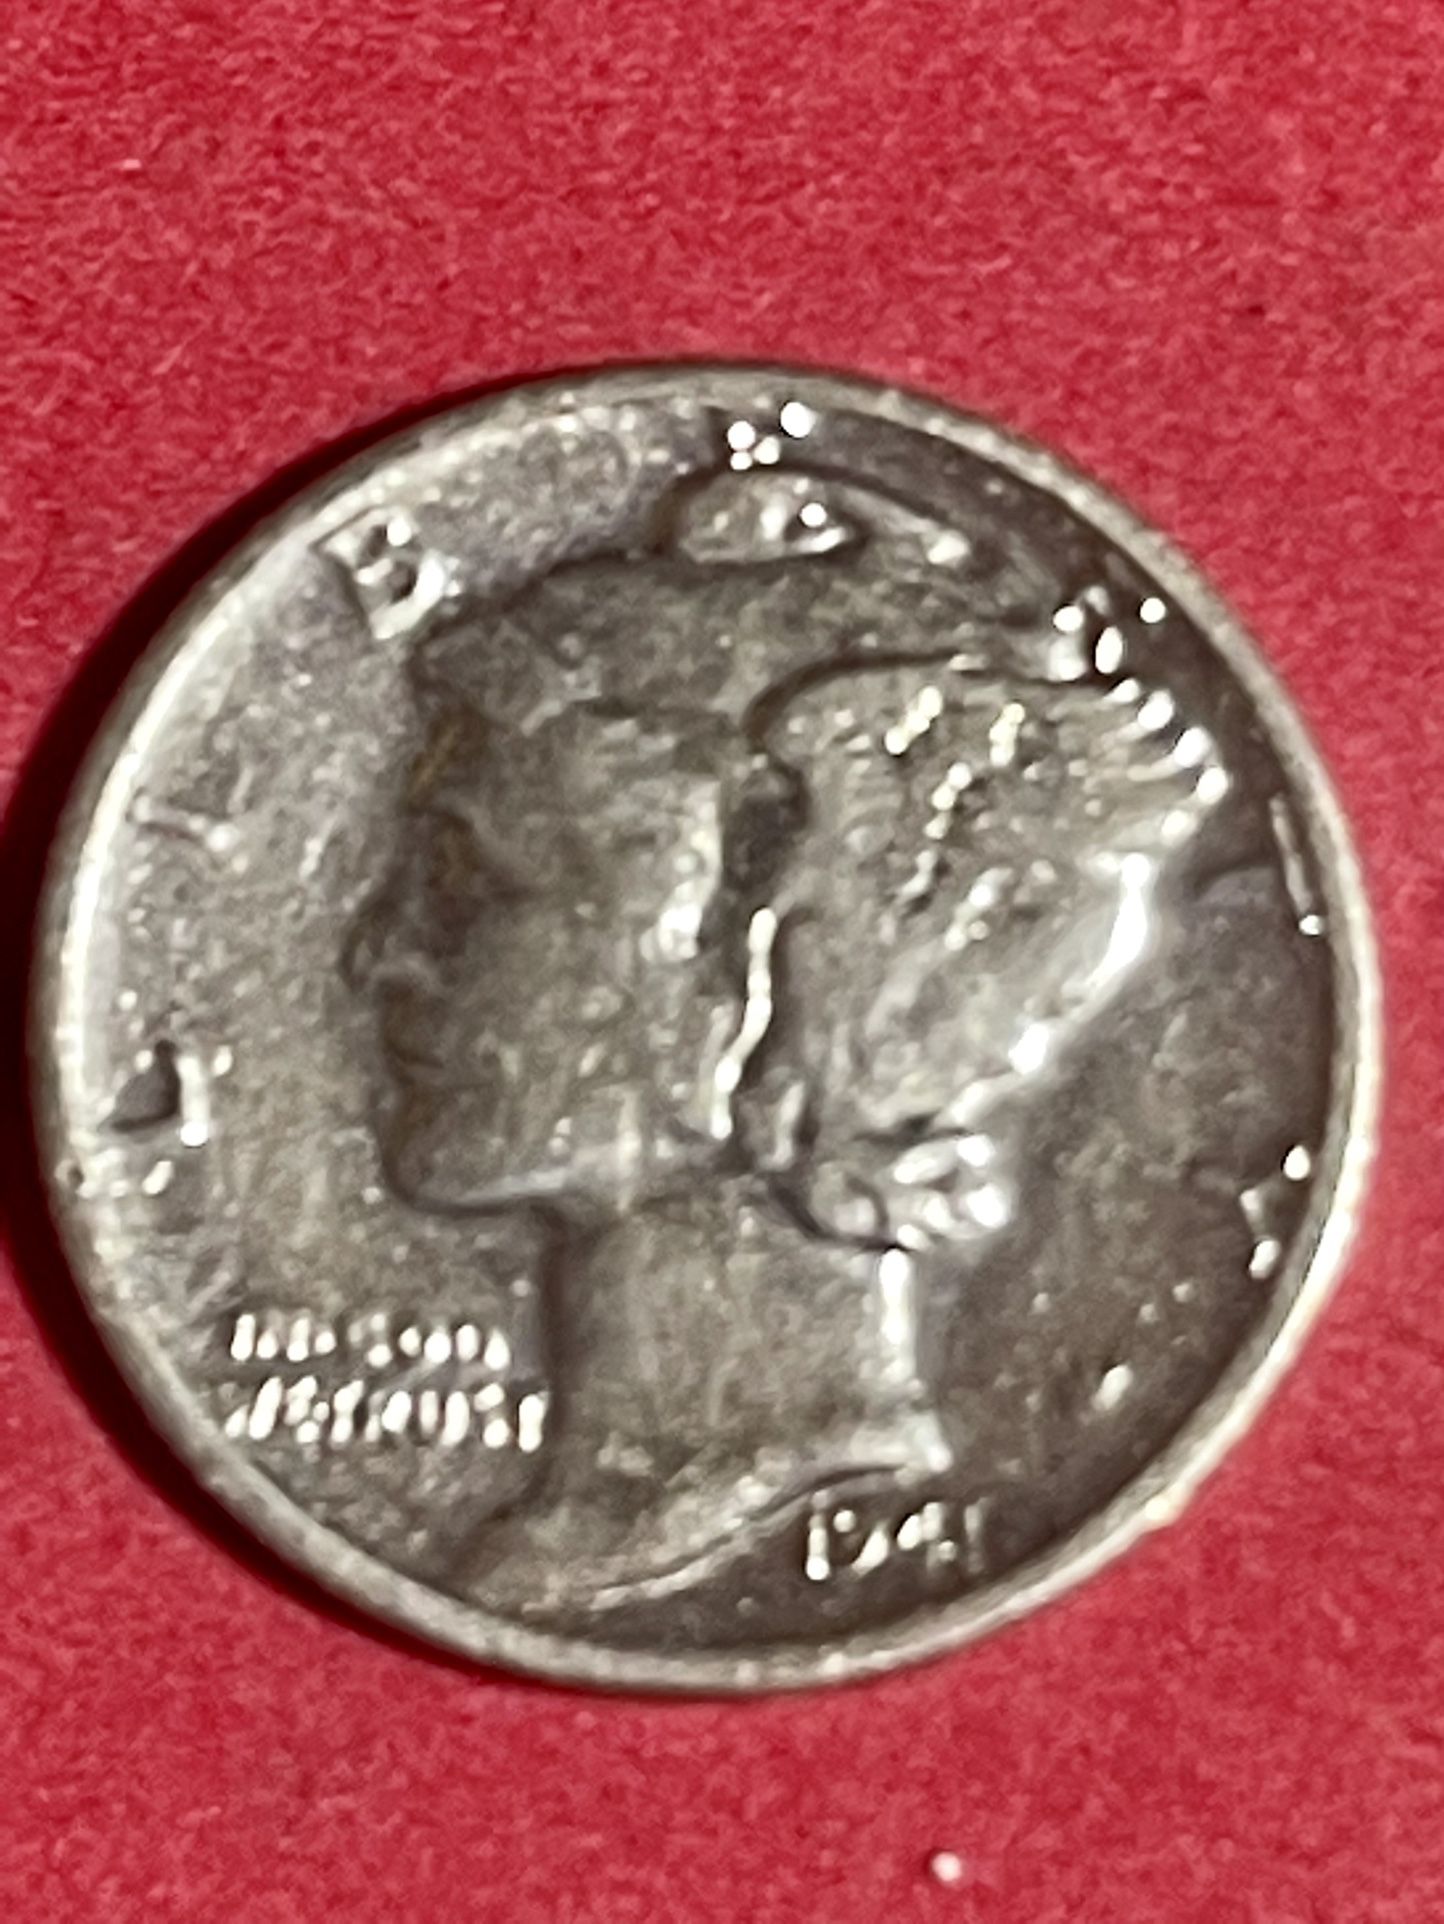 1942 s mercury dime with star error and also has solid bans on the columns on obverse side